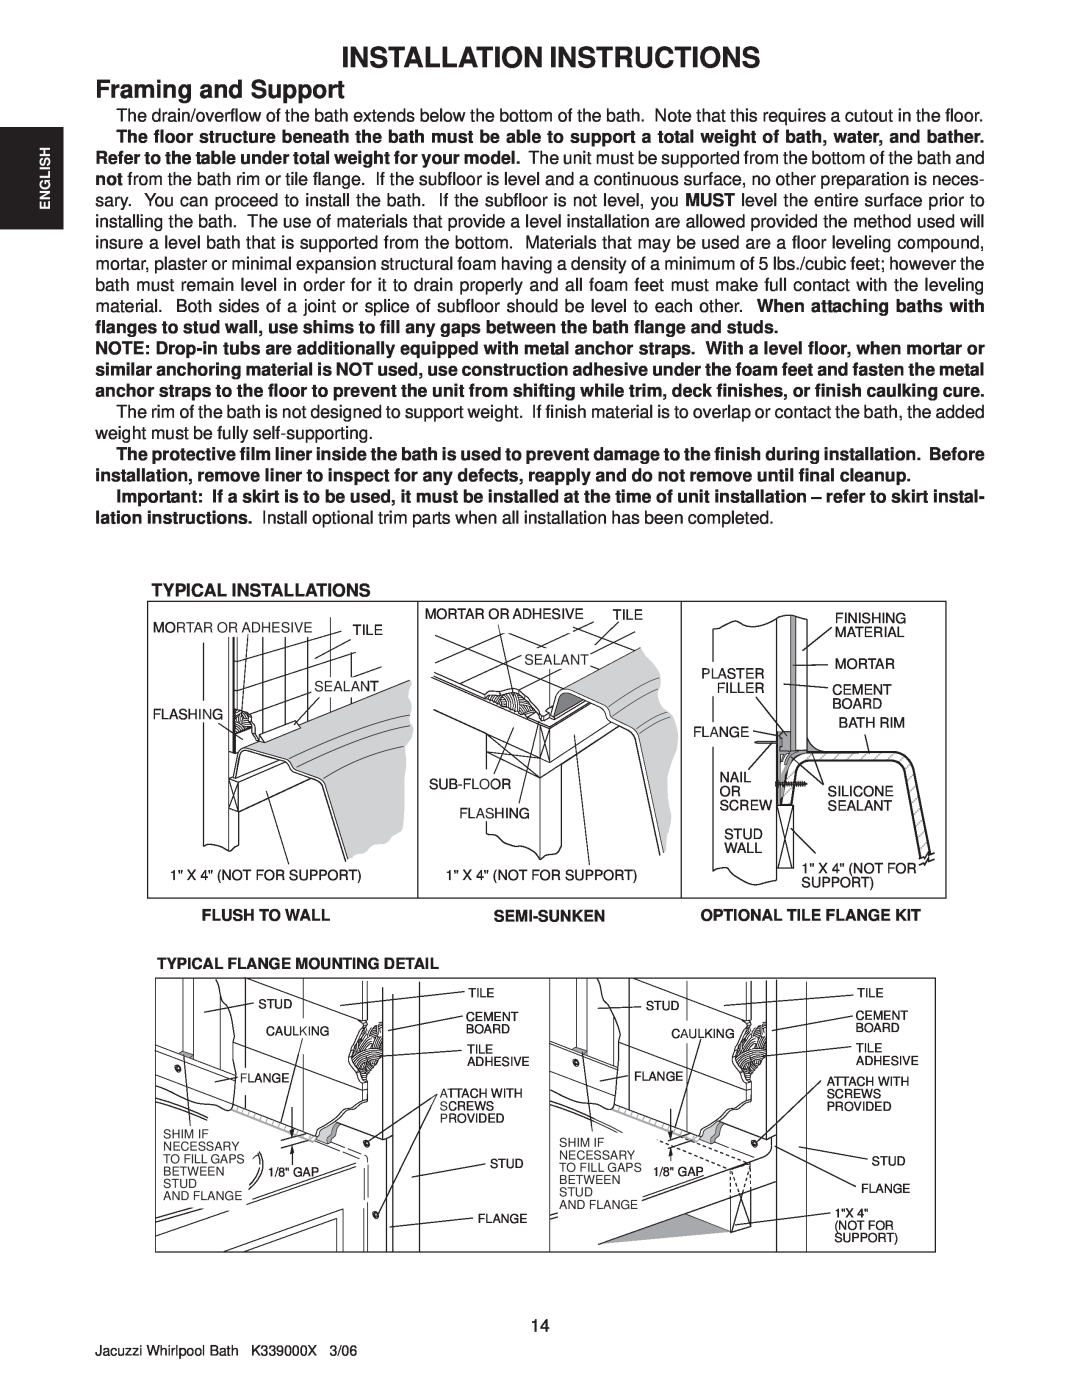 Jacuzzi K339000X manual Installation Instructions, Framing and Support, Typical Installations 